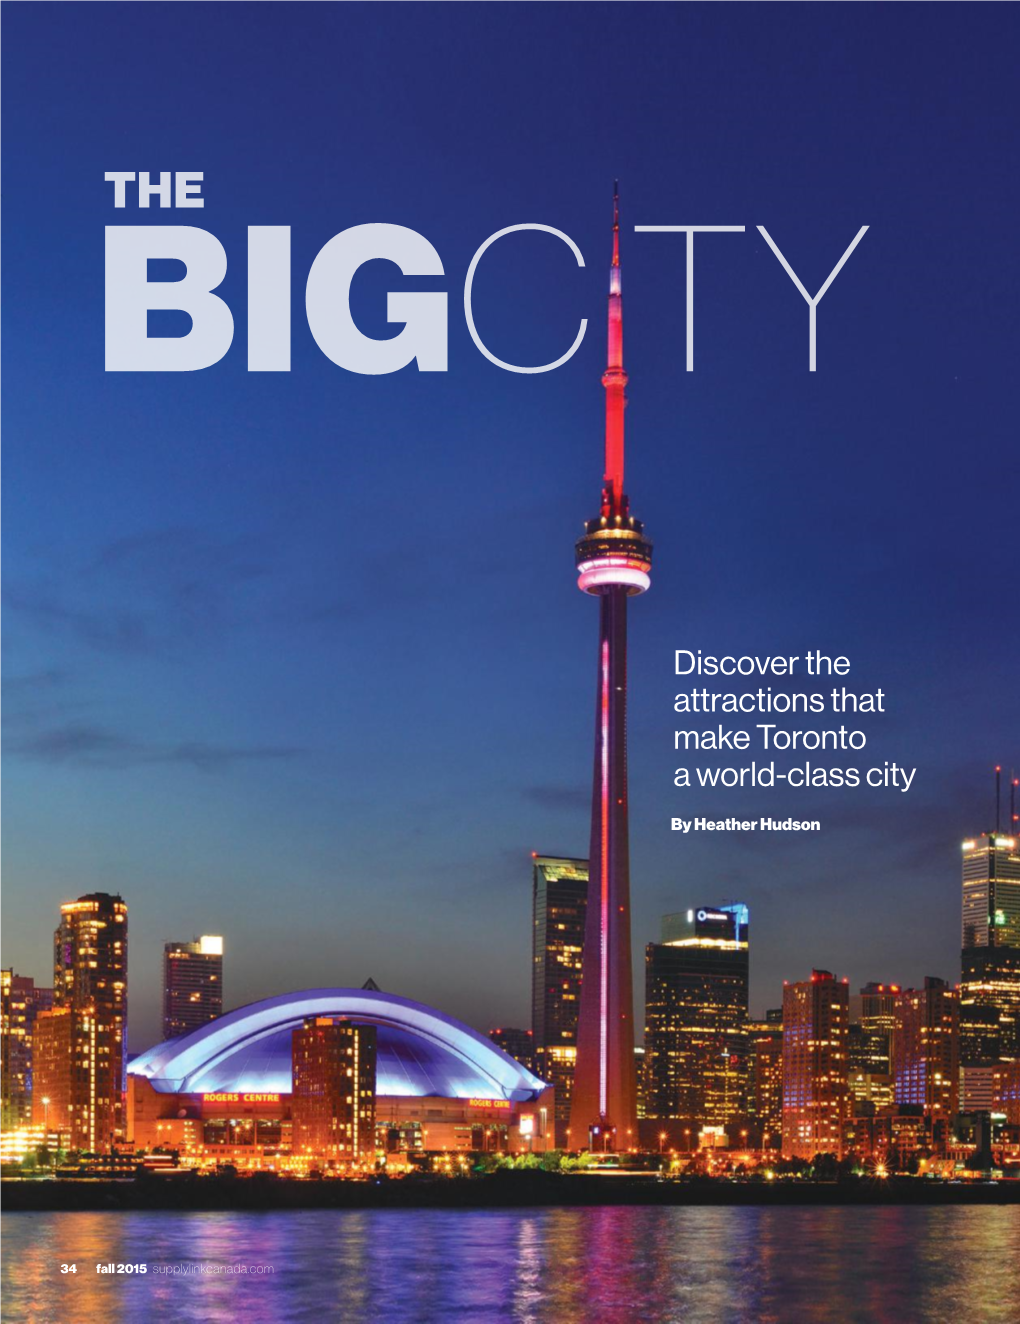 The Big City: Discover the Attractions That Make Toronto a World-Class City